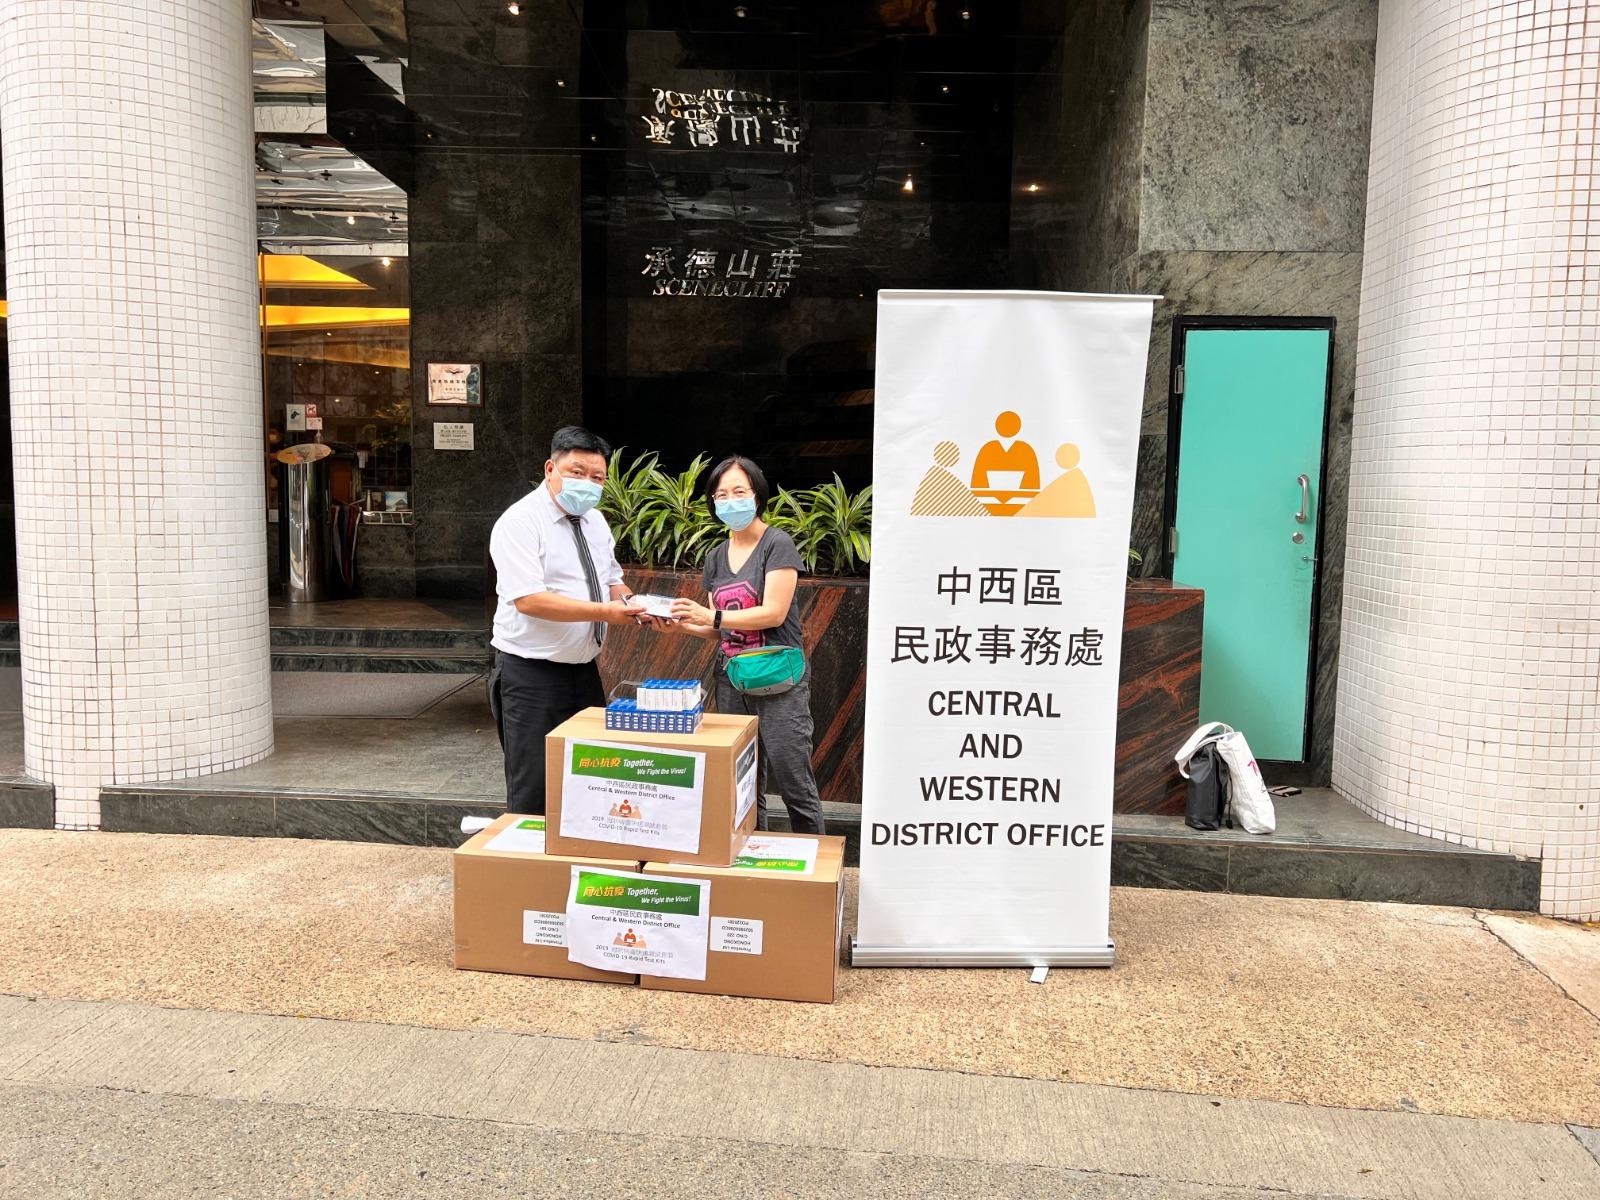 The Central and Western District Office today (June 11) distributed COVID-19 rapid test kits to households, cleansing workers and property management staff living and working in Scenecliff for voluntary testing through the property management companies and the owners' corporations.